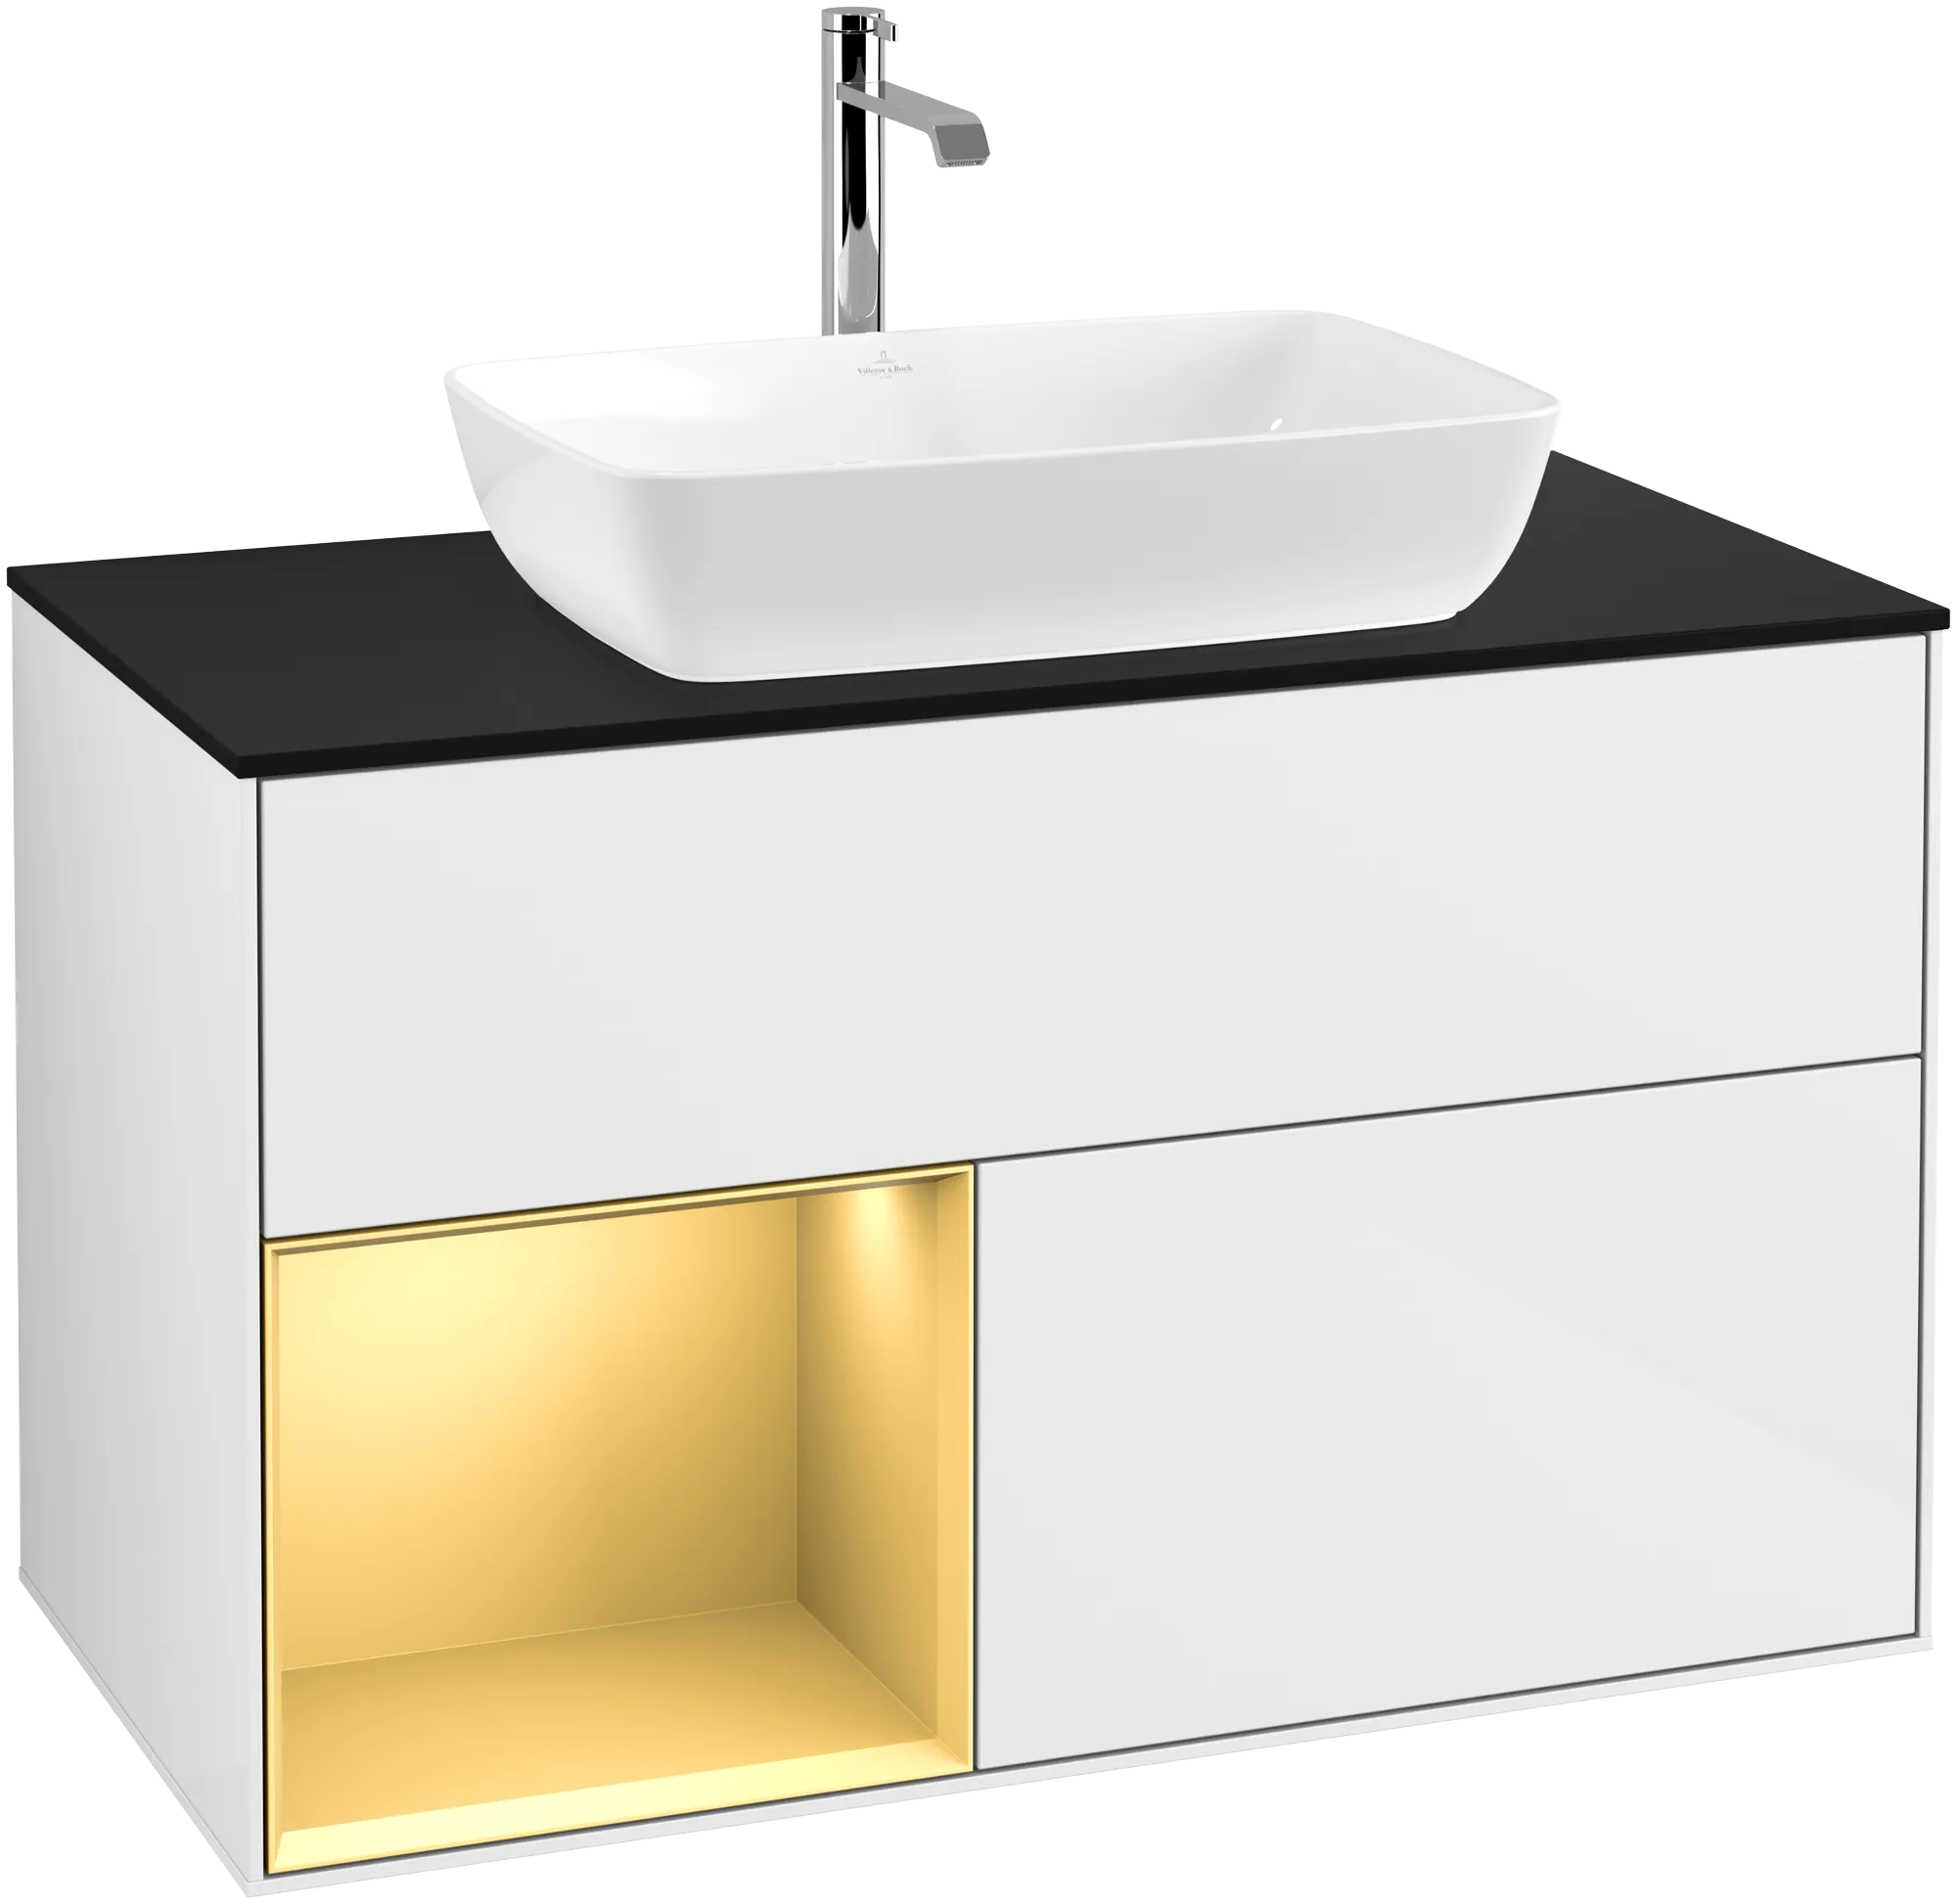 Obrázek VILLEROY BOCH Finion Vanity unit, with lighting, 2 pull-out compartments, 1000 x 603 x 501 mm, Glossy White Lacquer / Gold Matt Lacquer / Glass Black Matt #G772HFGF